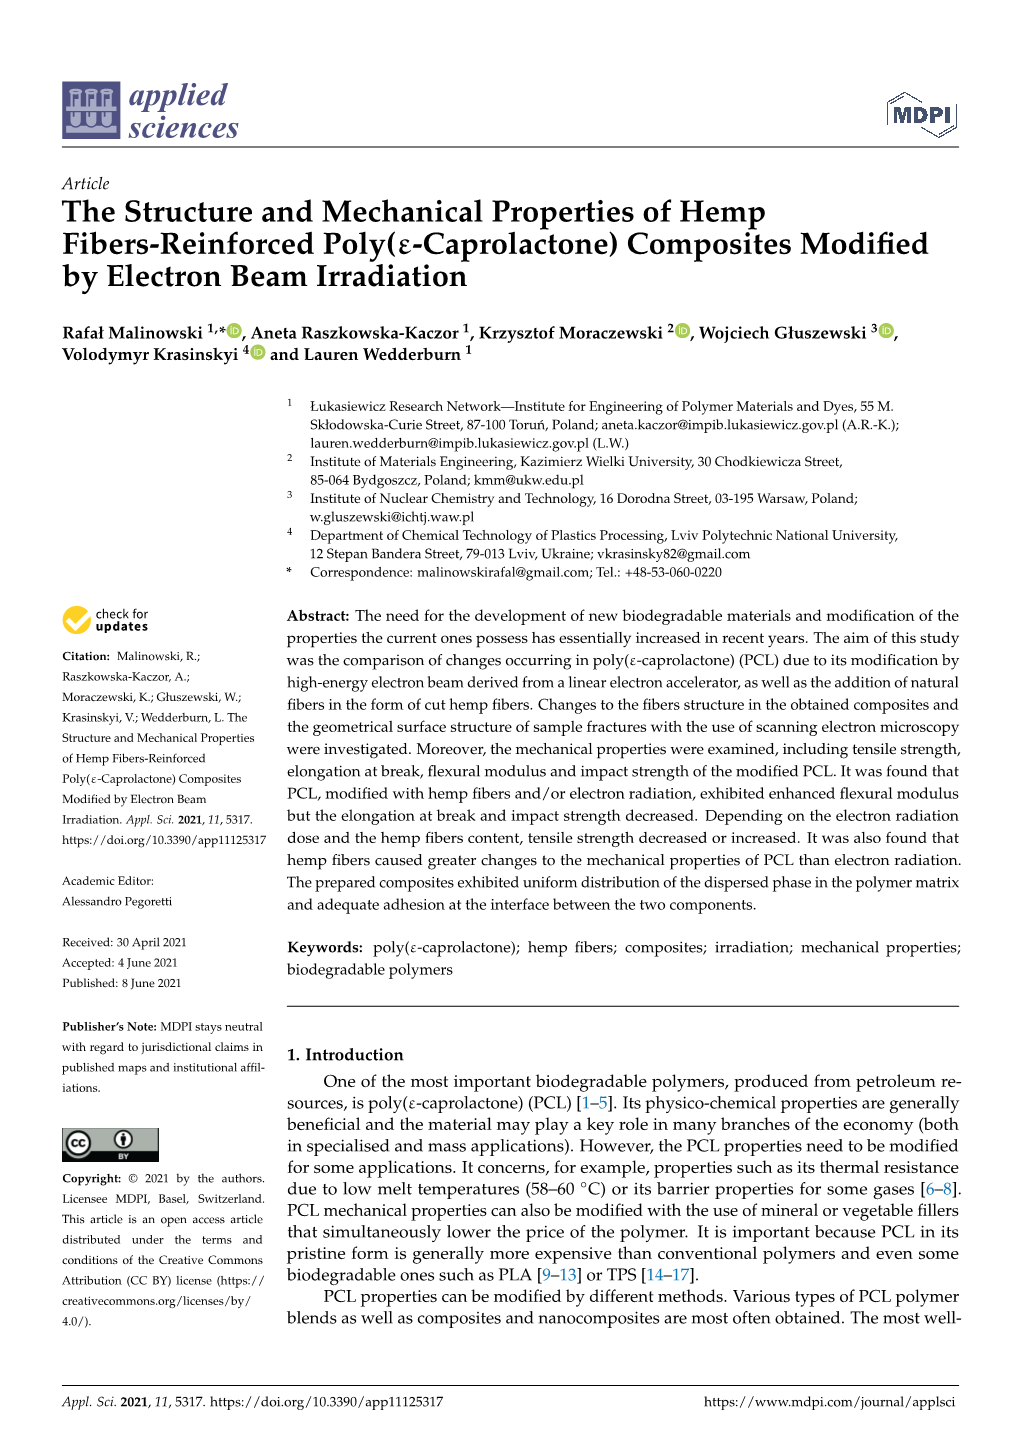 The Structure and Mechanical Properties of Hemp Fibers-Reinforced Poly(-Caprolactone)